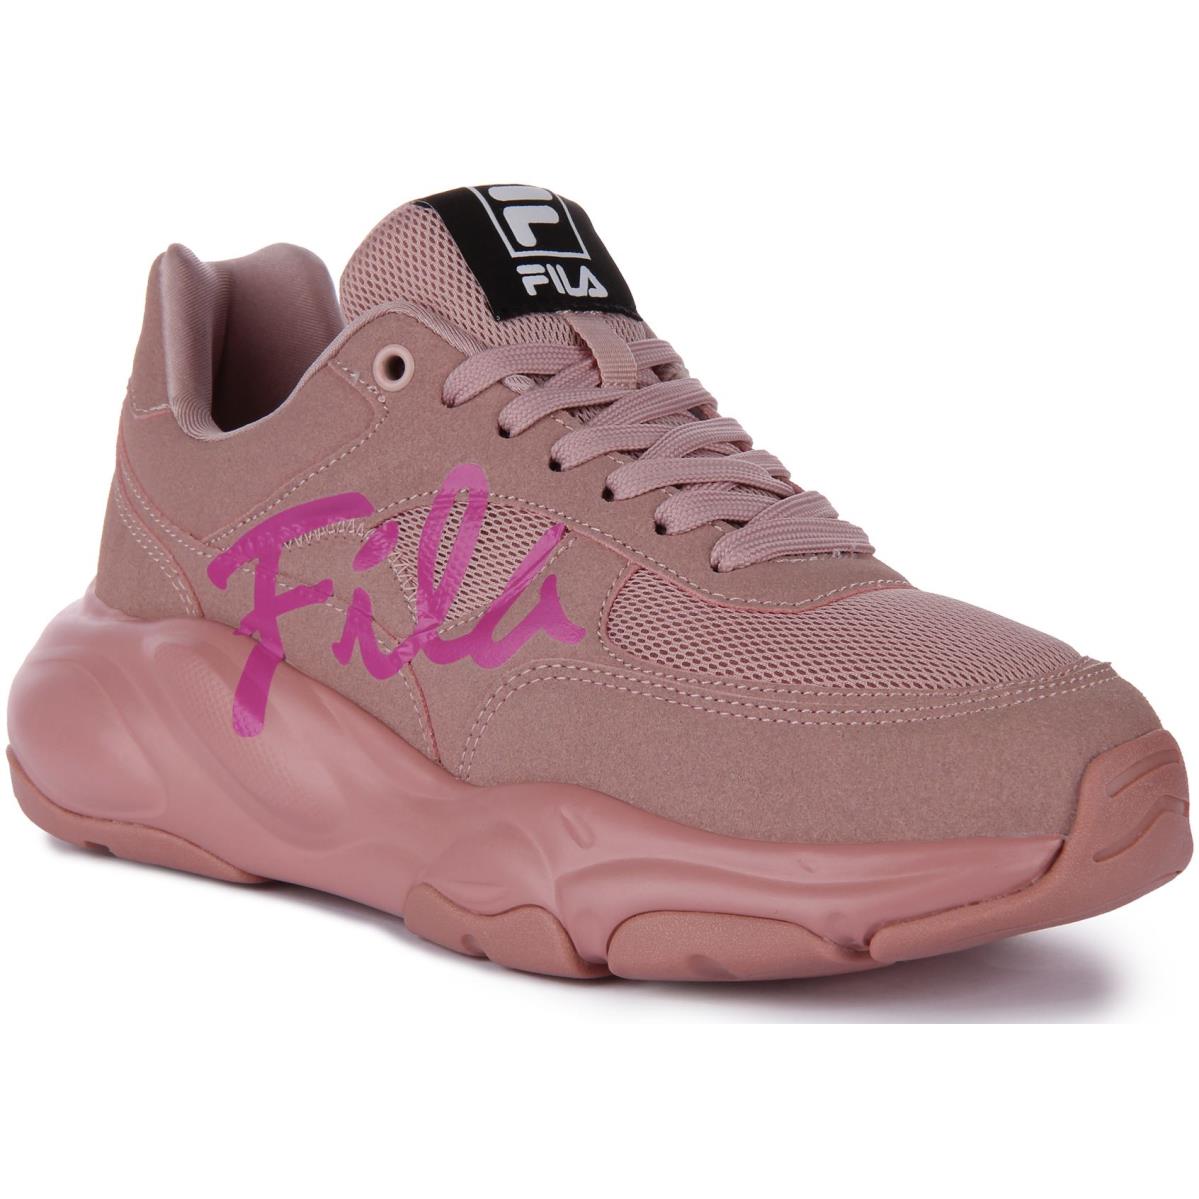 Fila Astro Low Chunky Lace Up Side Logo Suede Mesh Sneaker Light Pink US 4 - 13 LIGHT PINK